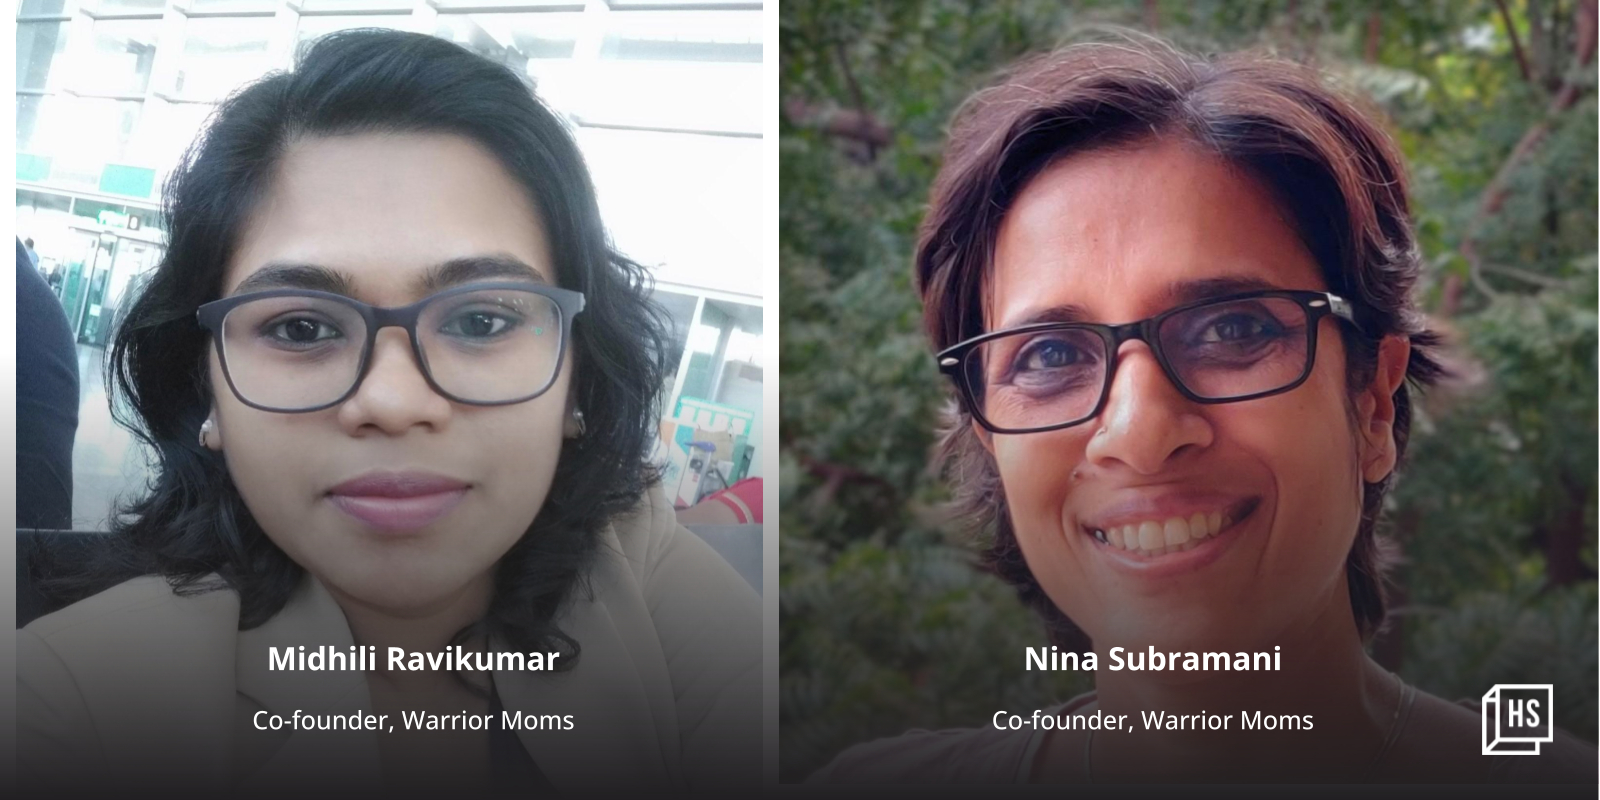 Meet the Warrior Moms who are fighting climate change 